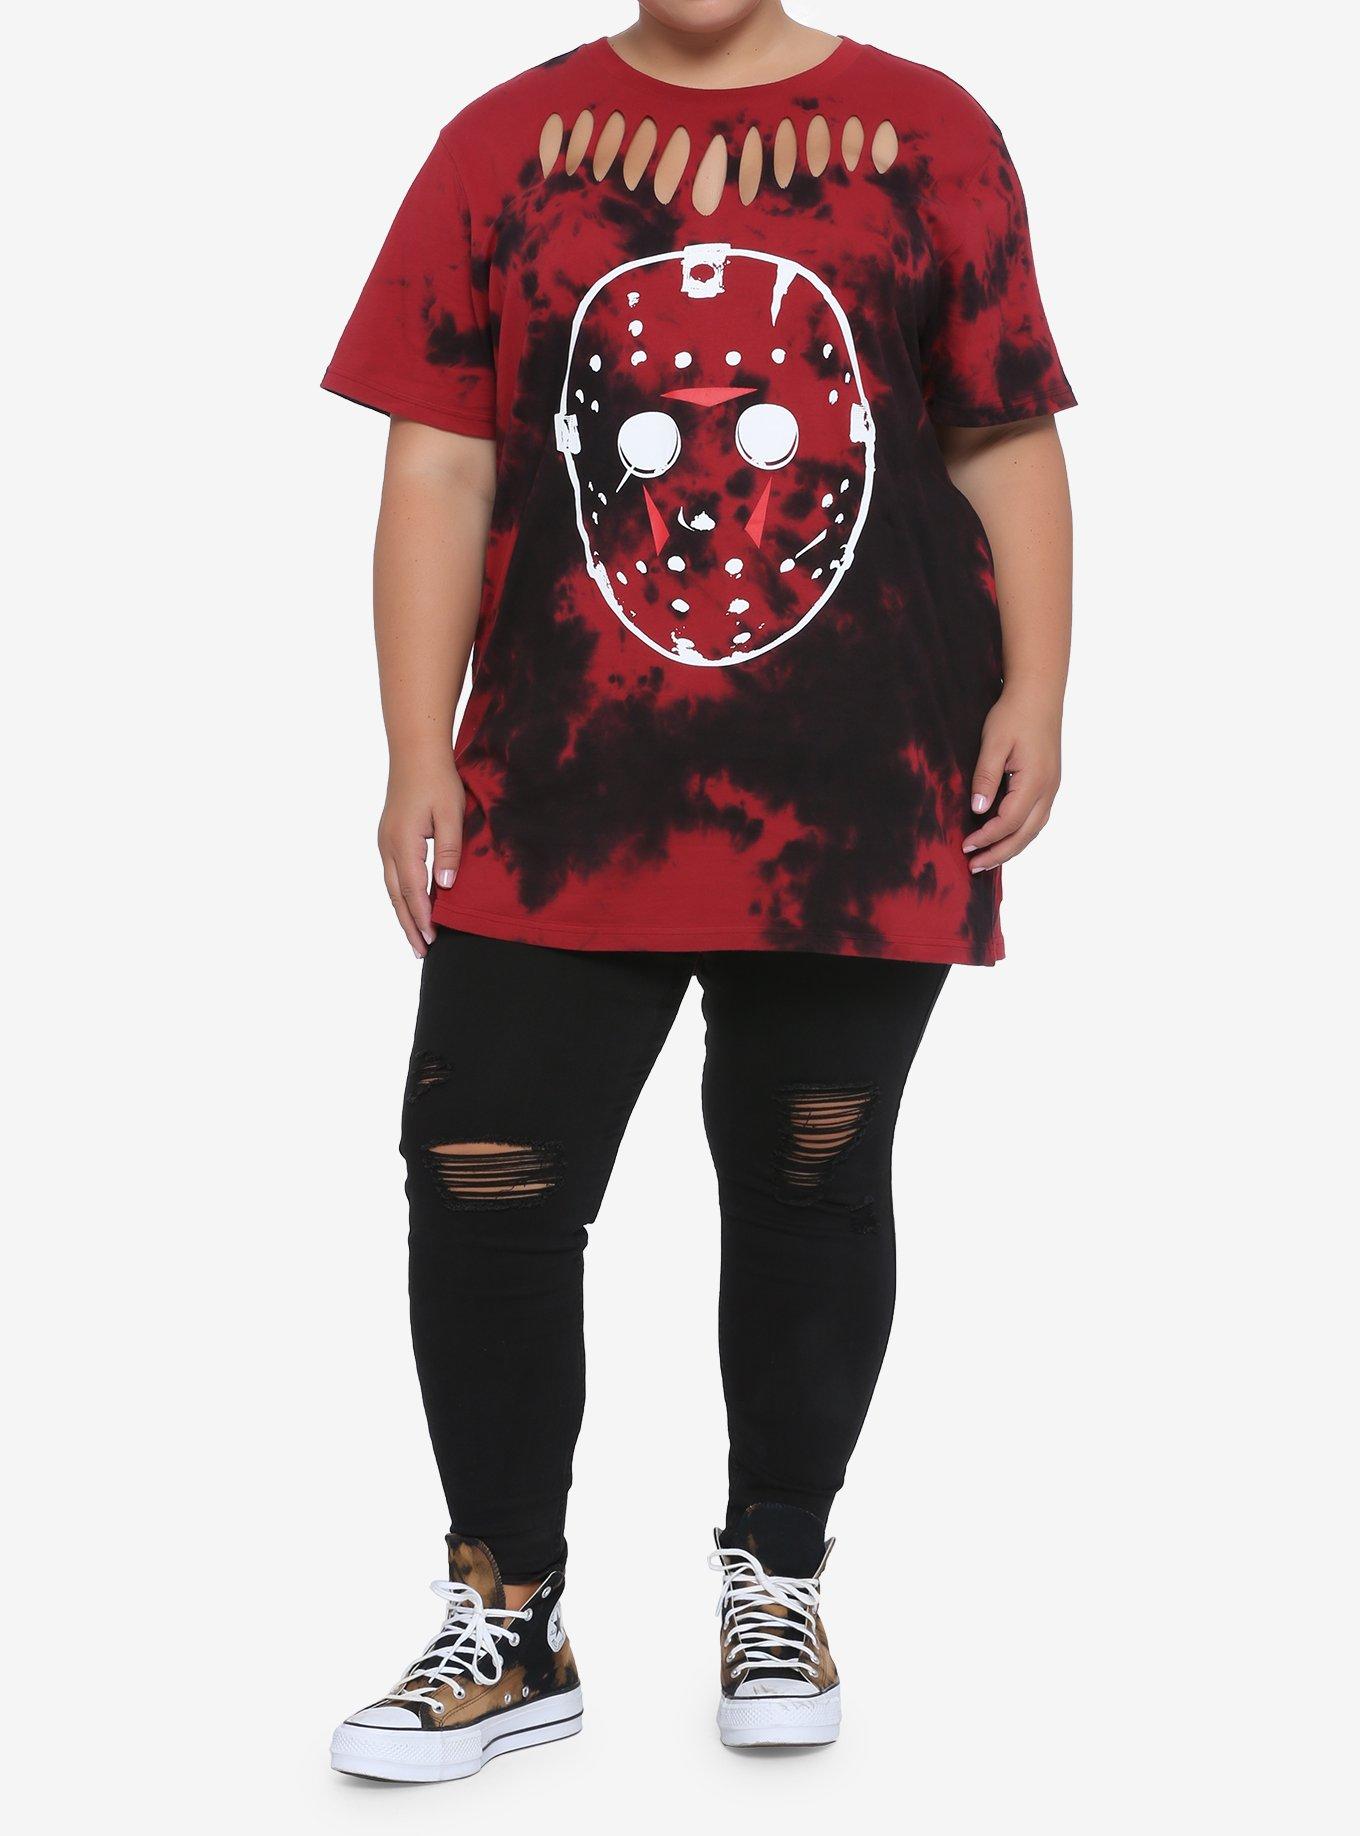 Friday The 13th Mask Slashed Tie-Dye Girls T-Shirt Plus Size, RED, alternate